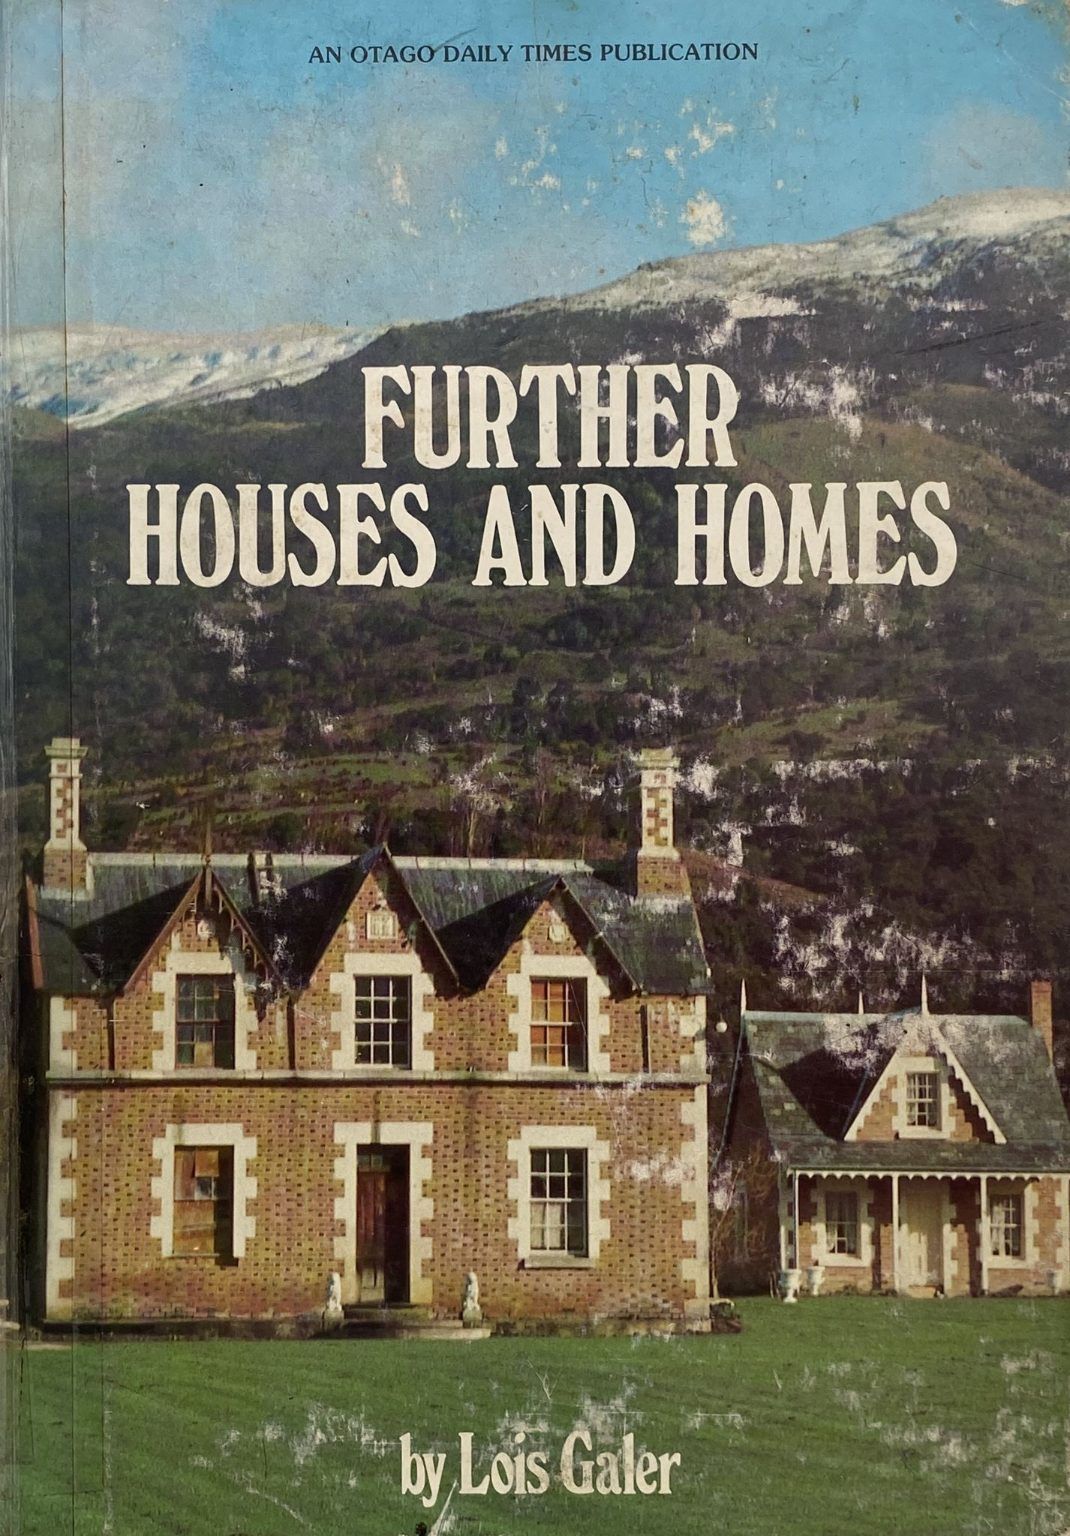 FURTHER HOUSES AND HOMES